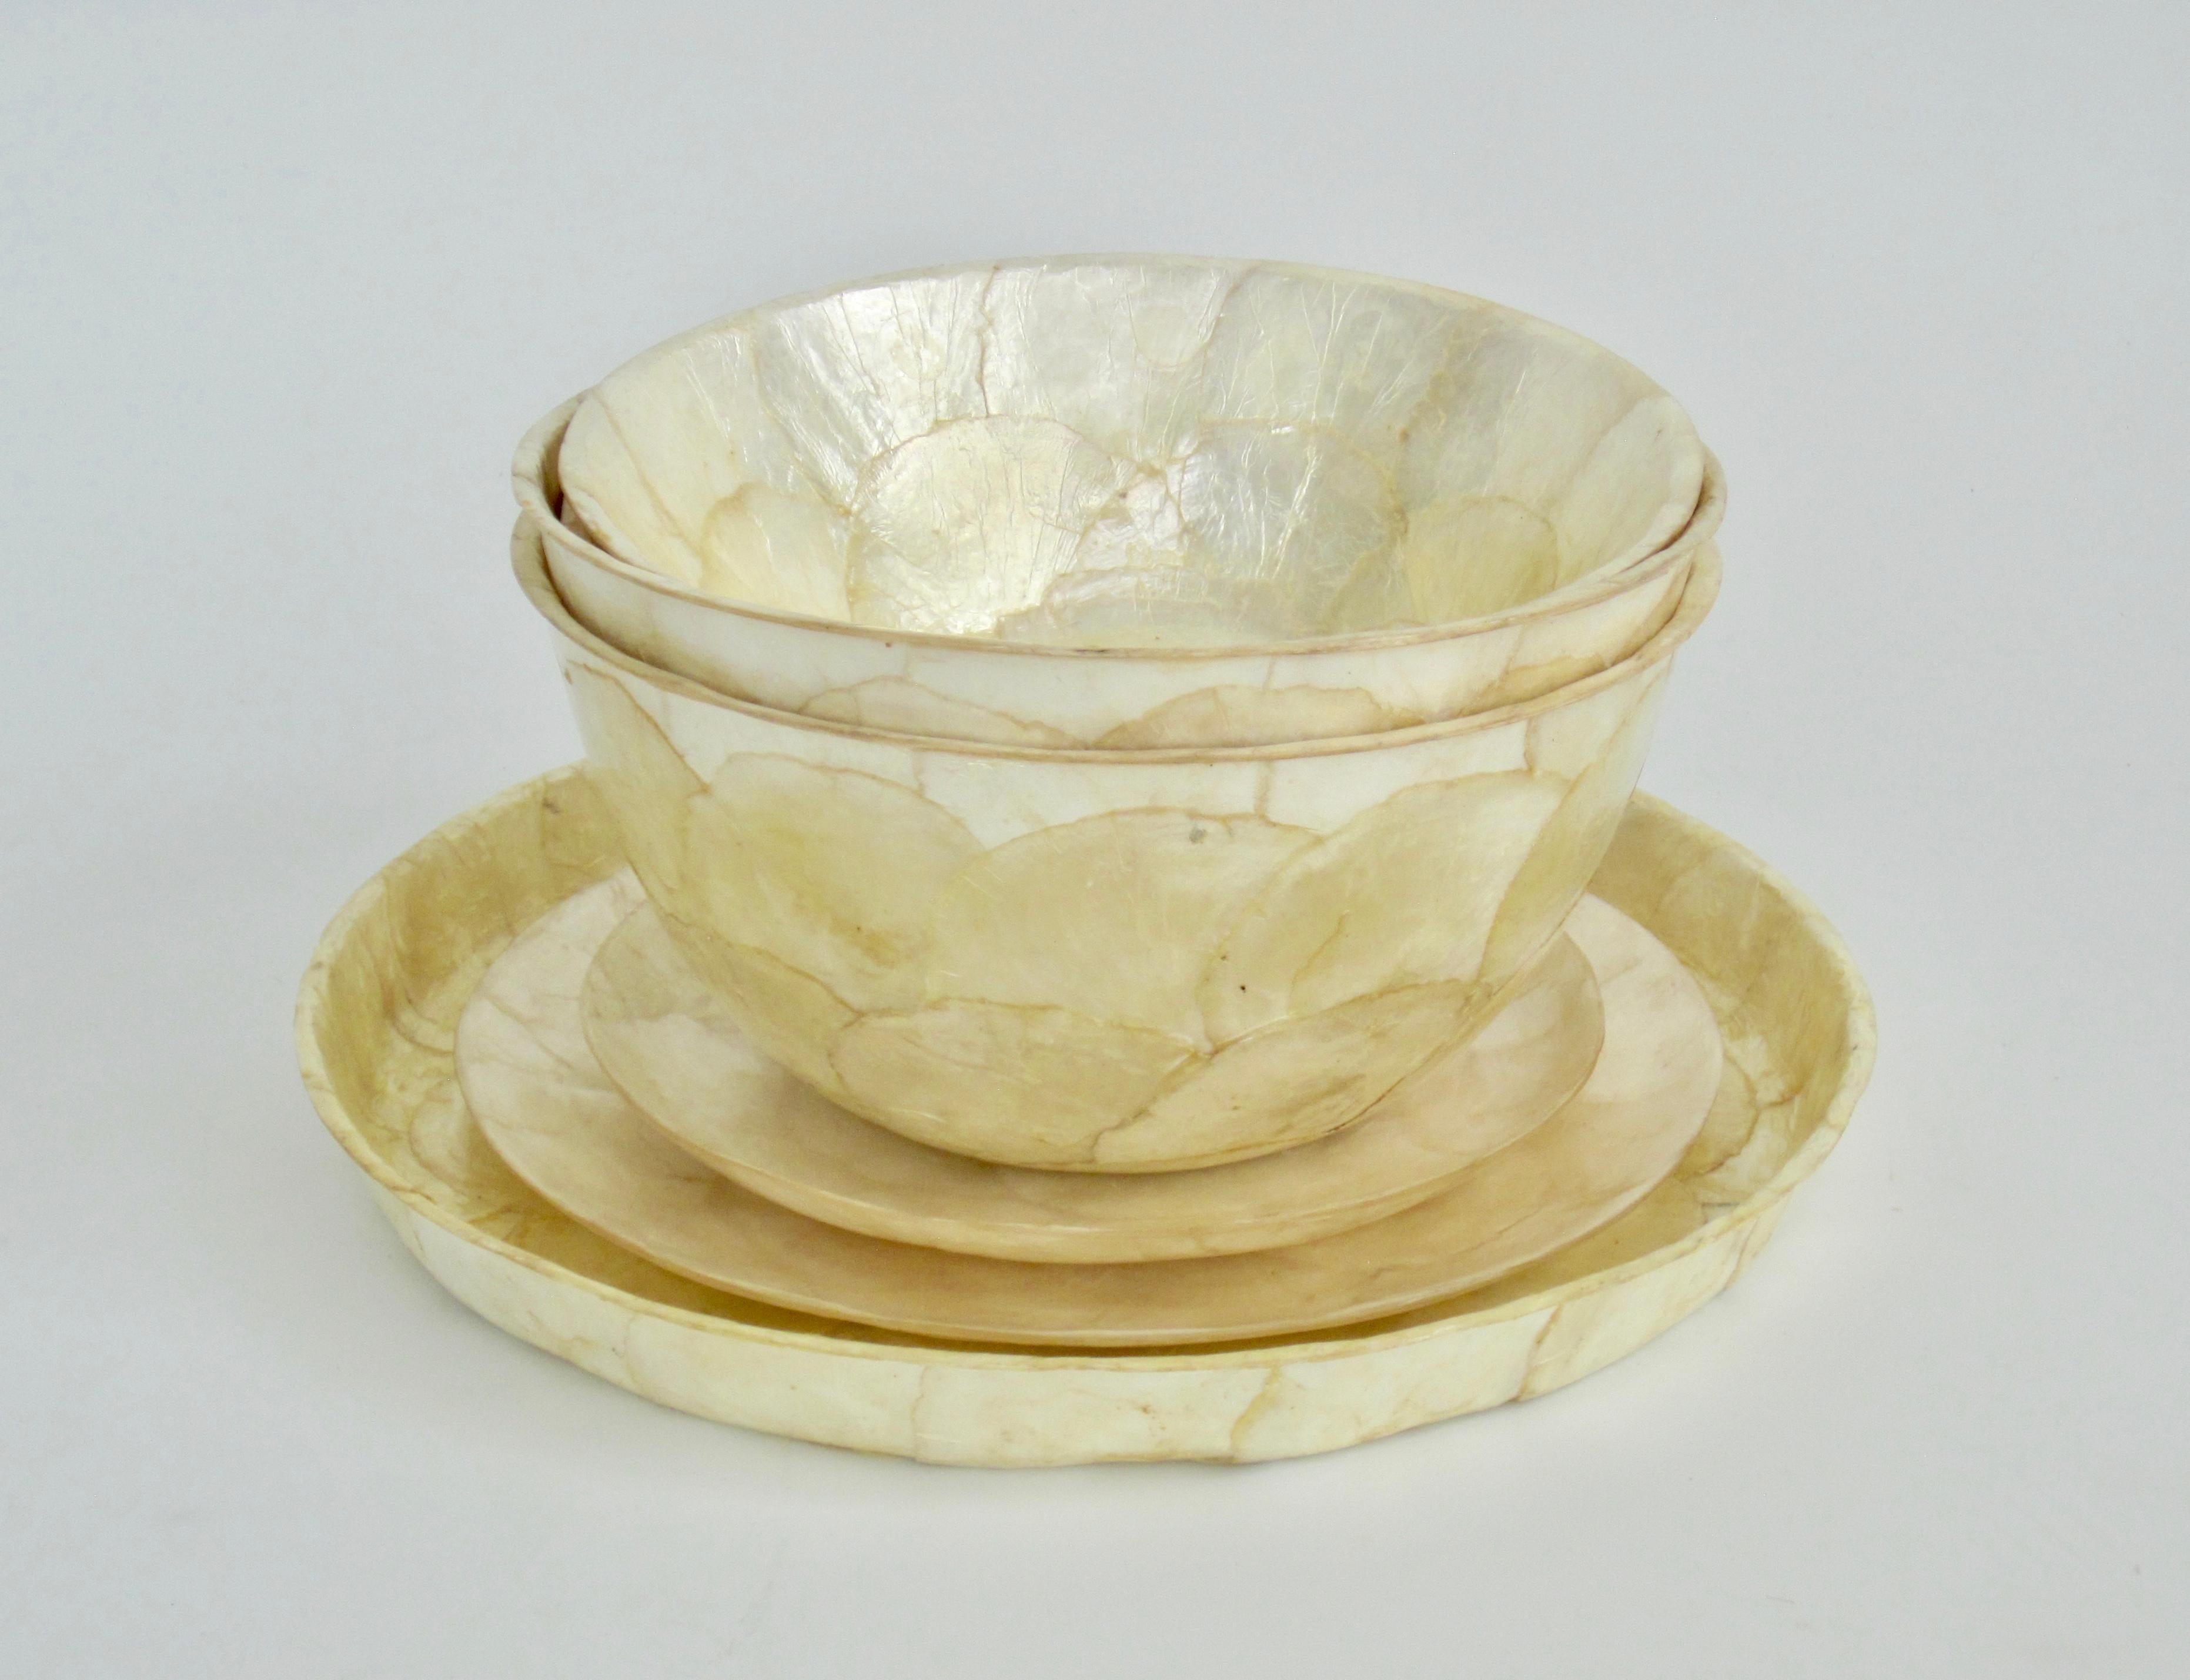 Seven piece set includes four bowls, two plates, and one round platter.
Handmade in the 1970s, each piece has been formed with capiz shell, a thin almost translucent shell found in the Indo-Pacific. It is also known as the windowpane oyster and has